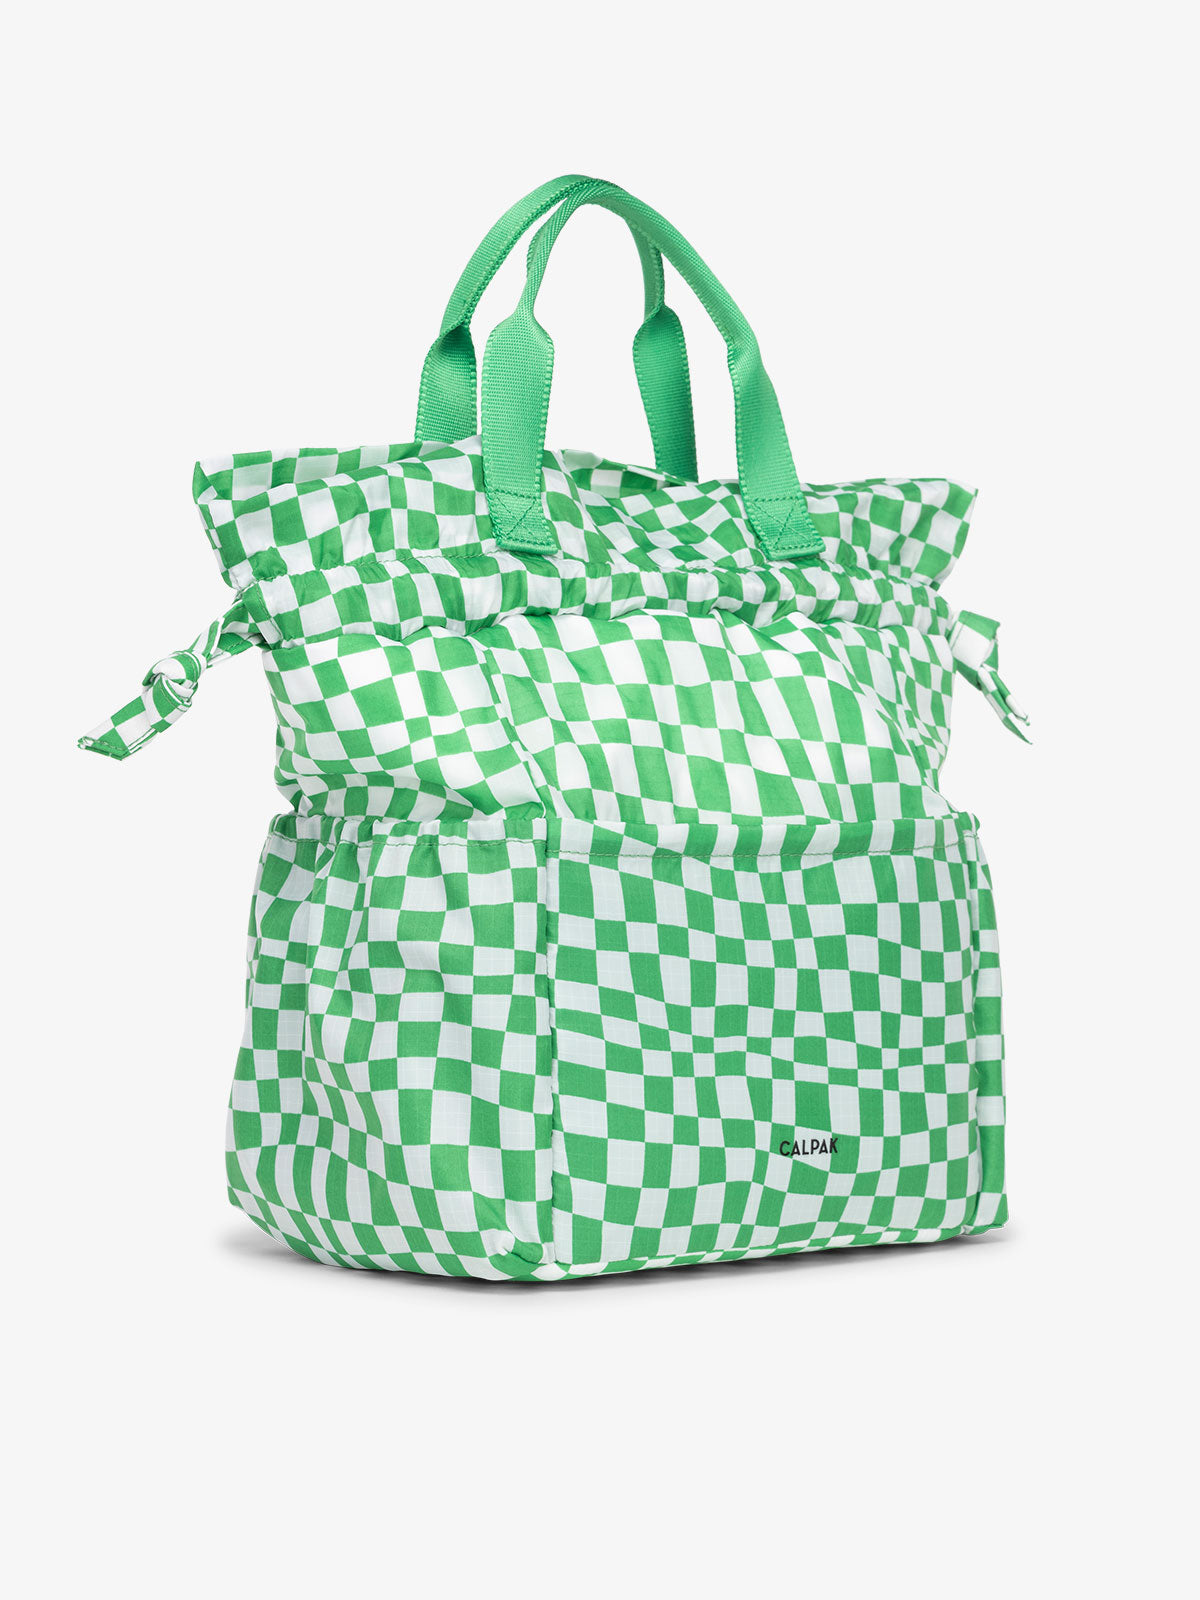 CALPAK Insulated Lunch Bag for men with multiple pockets and drawstring closure in green checker print